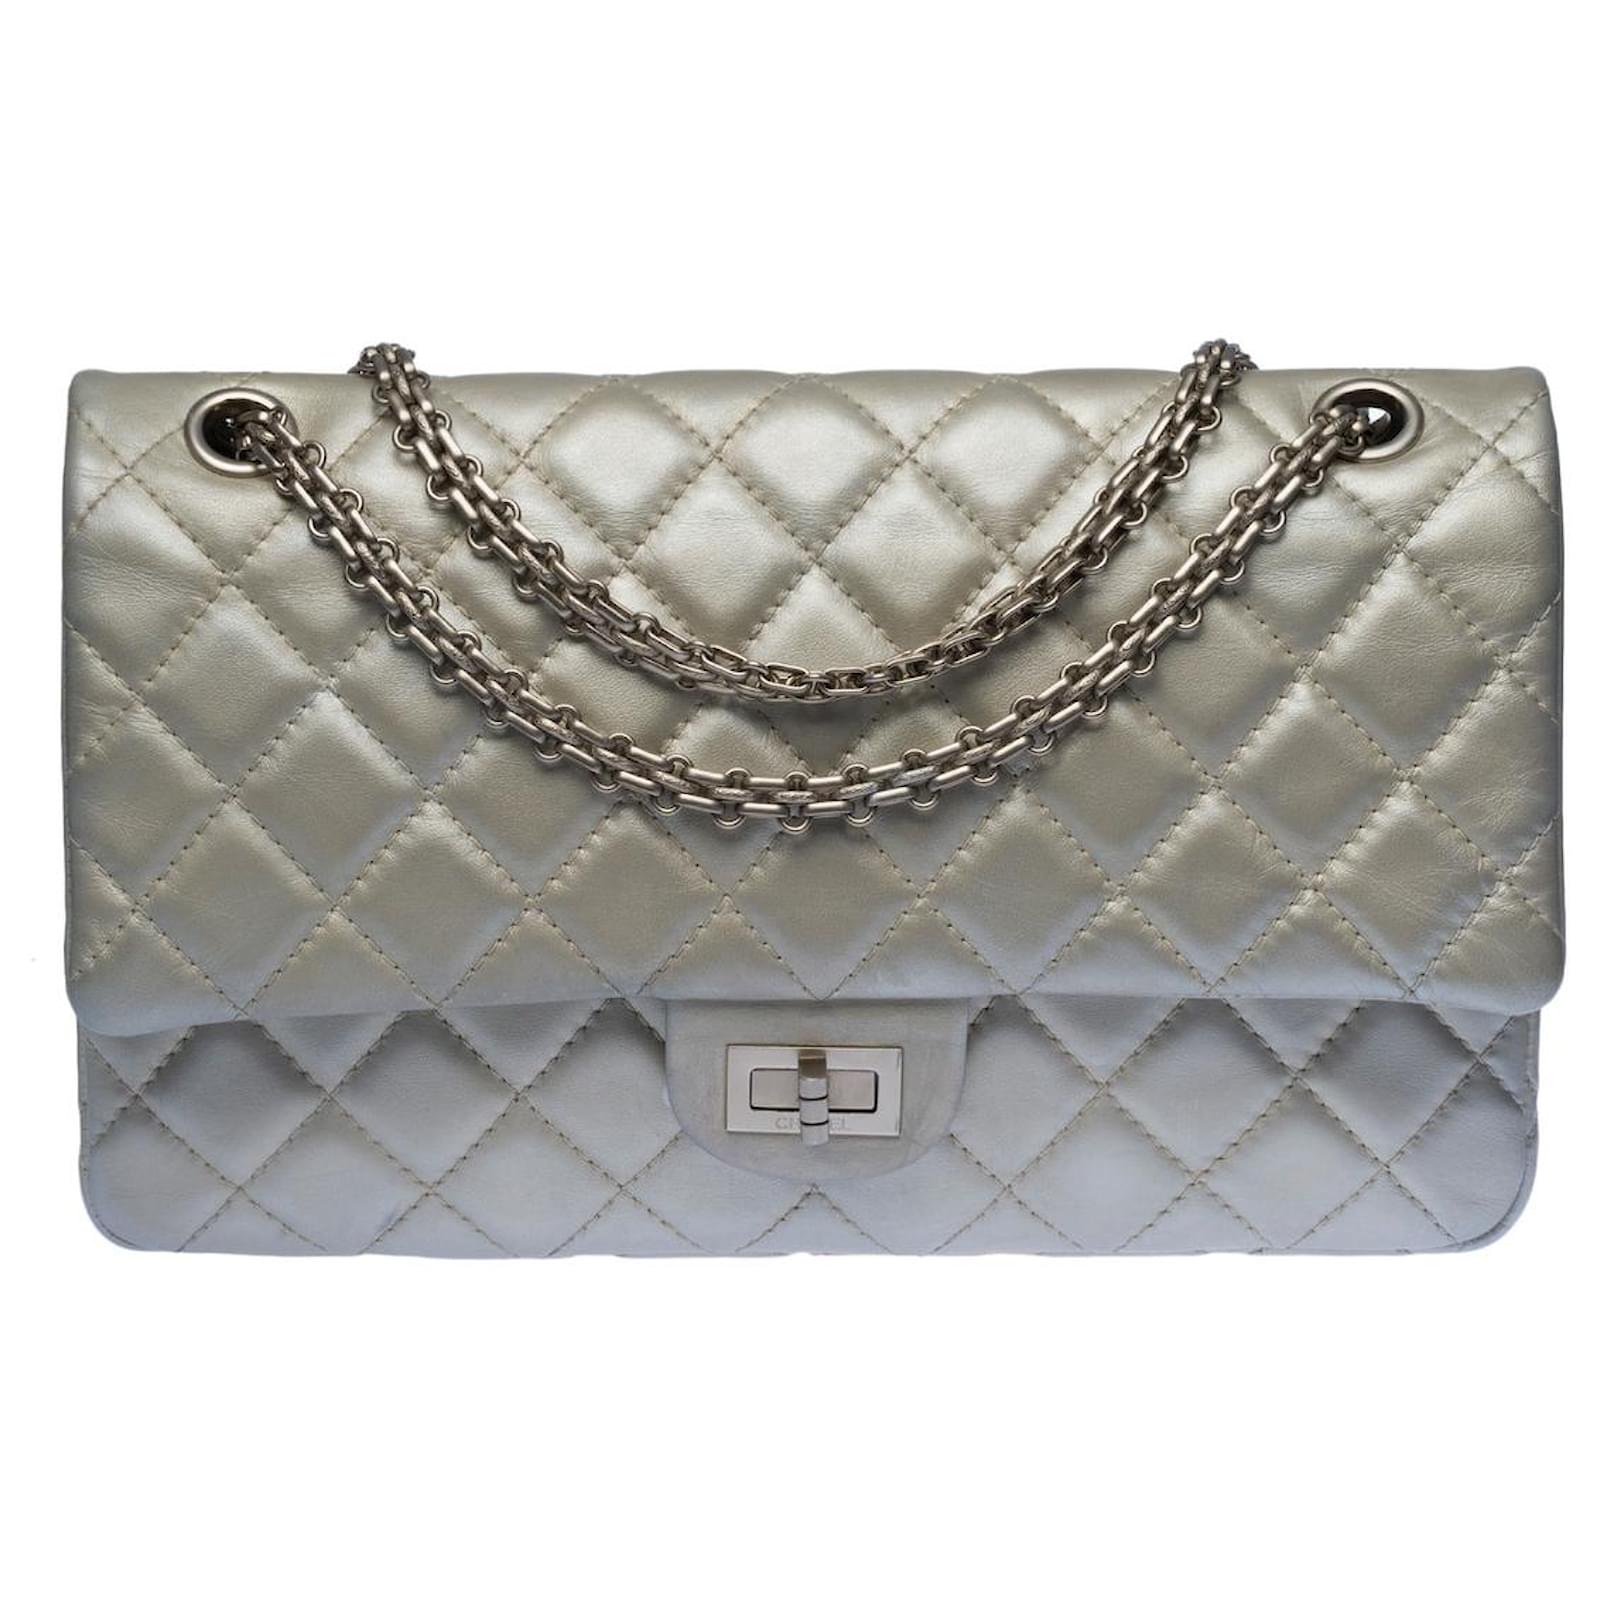 Misc Chanel Chanel Bag 2.55 in Silver Leather - 100179